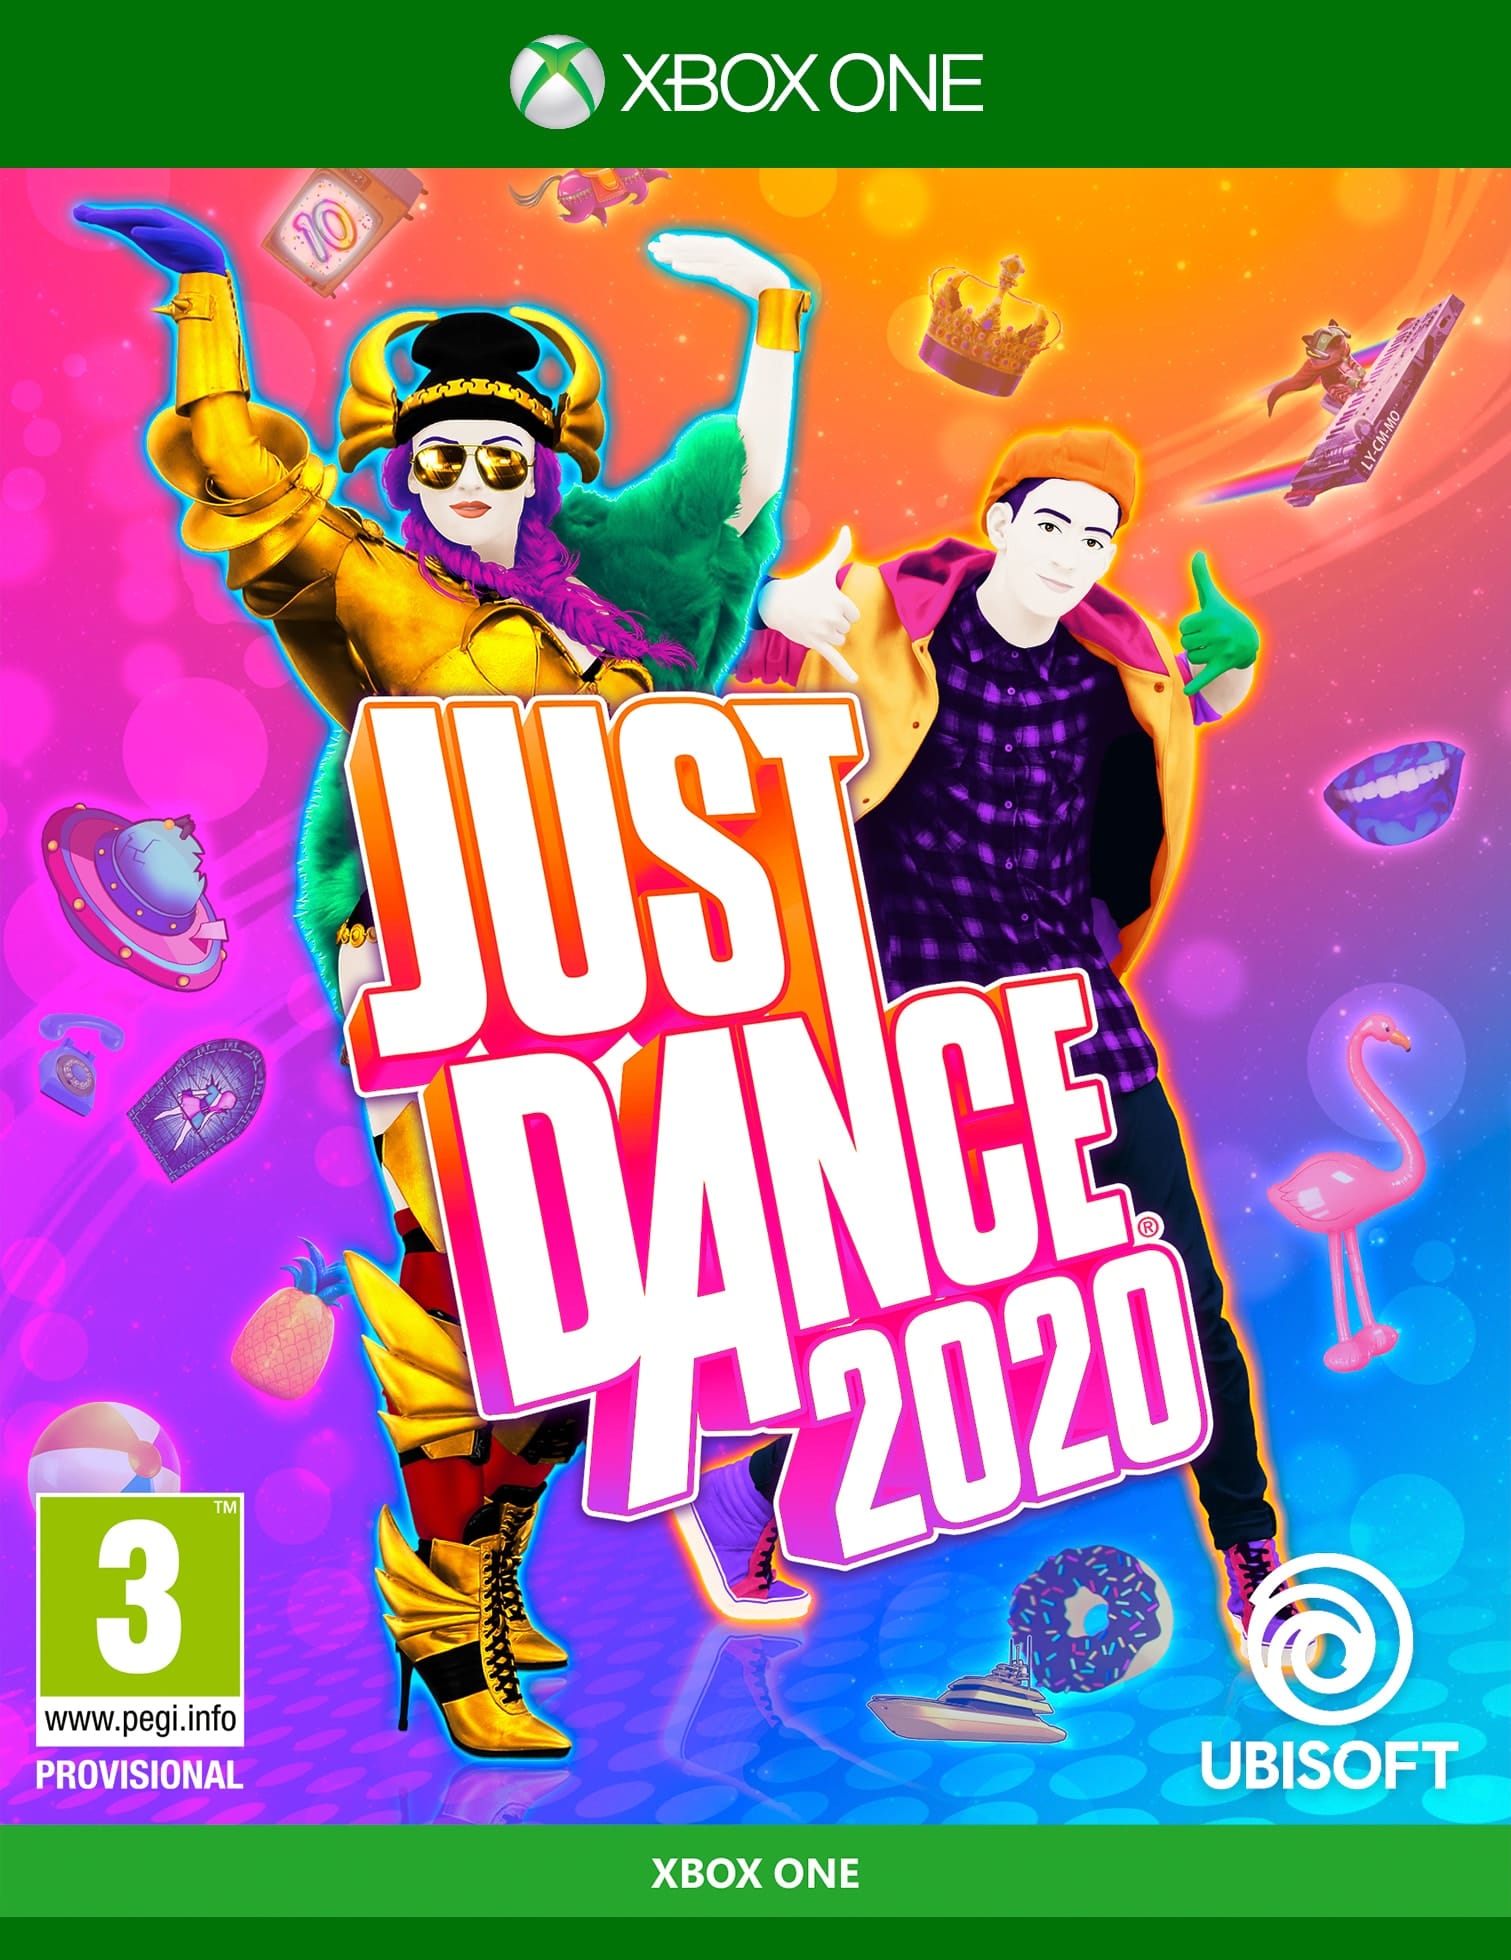 Just dance 2020 jaquette xbox one min 1